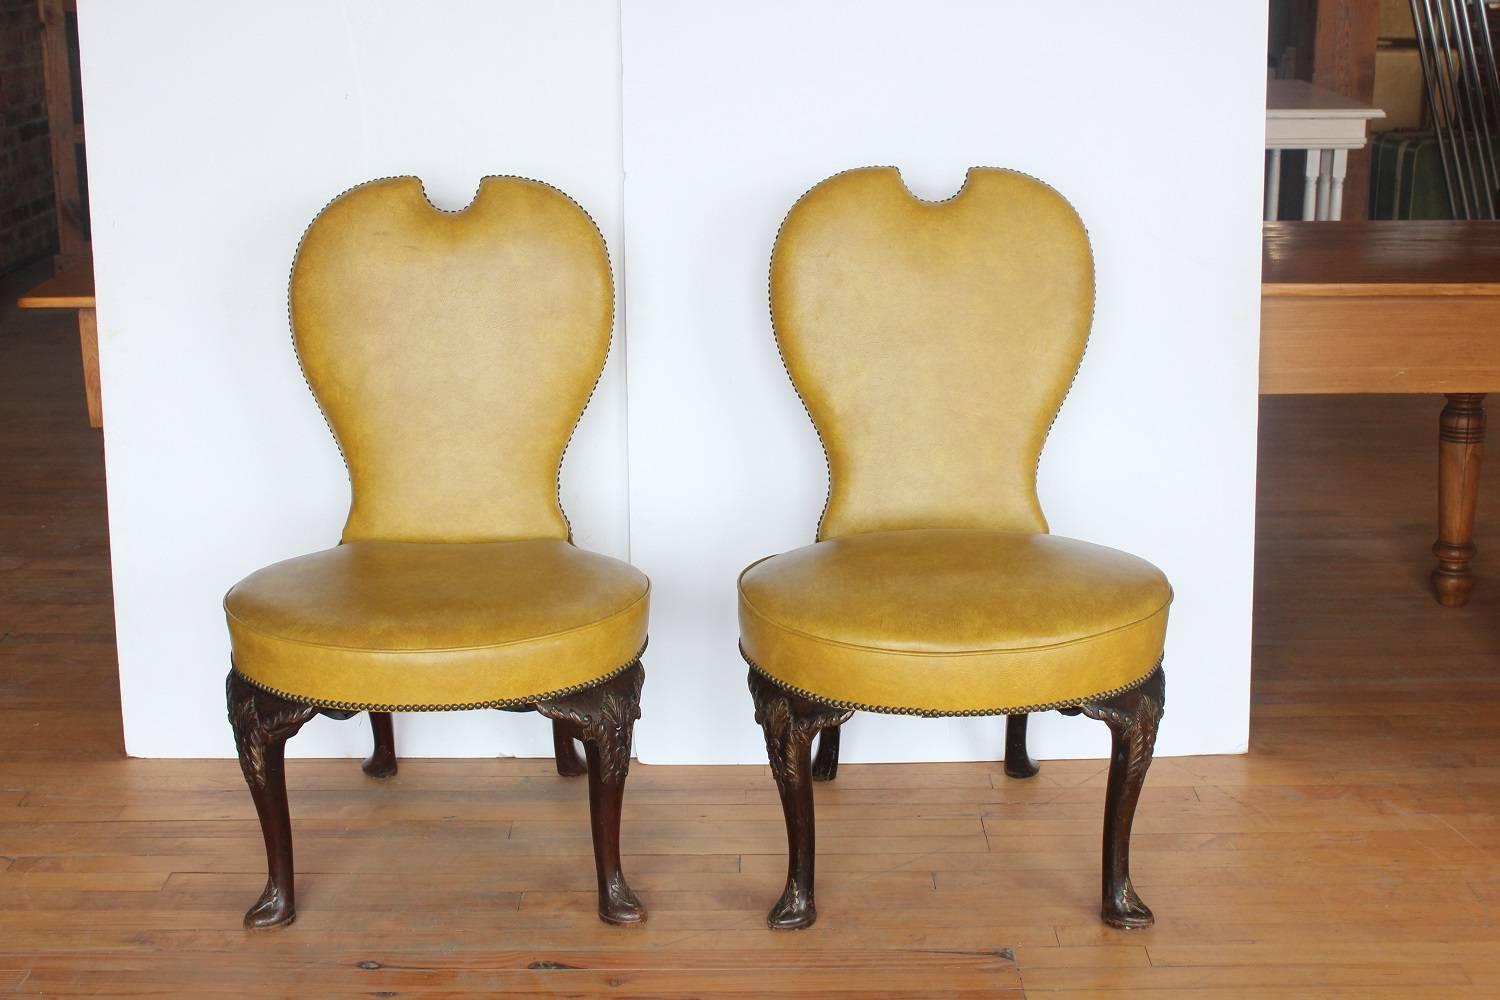 Stylish pair of early 20th century American library chairs.